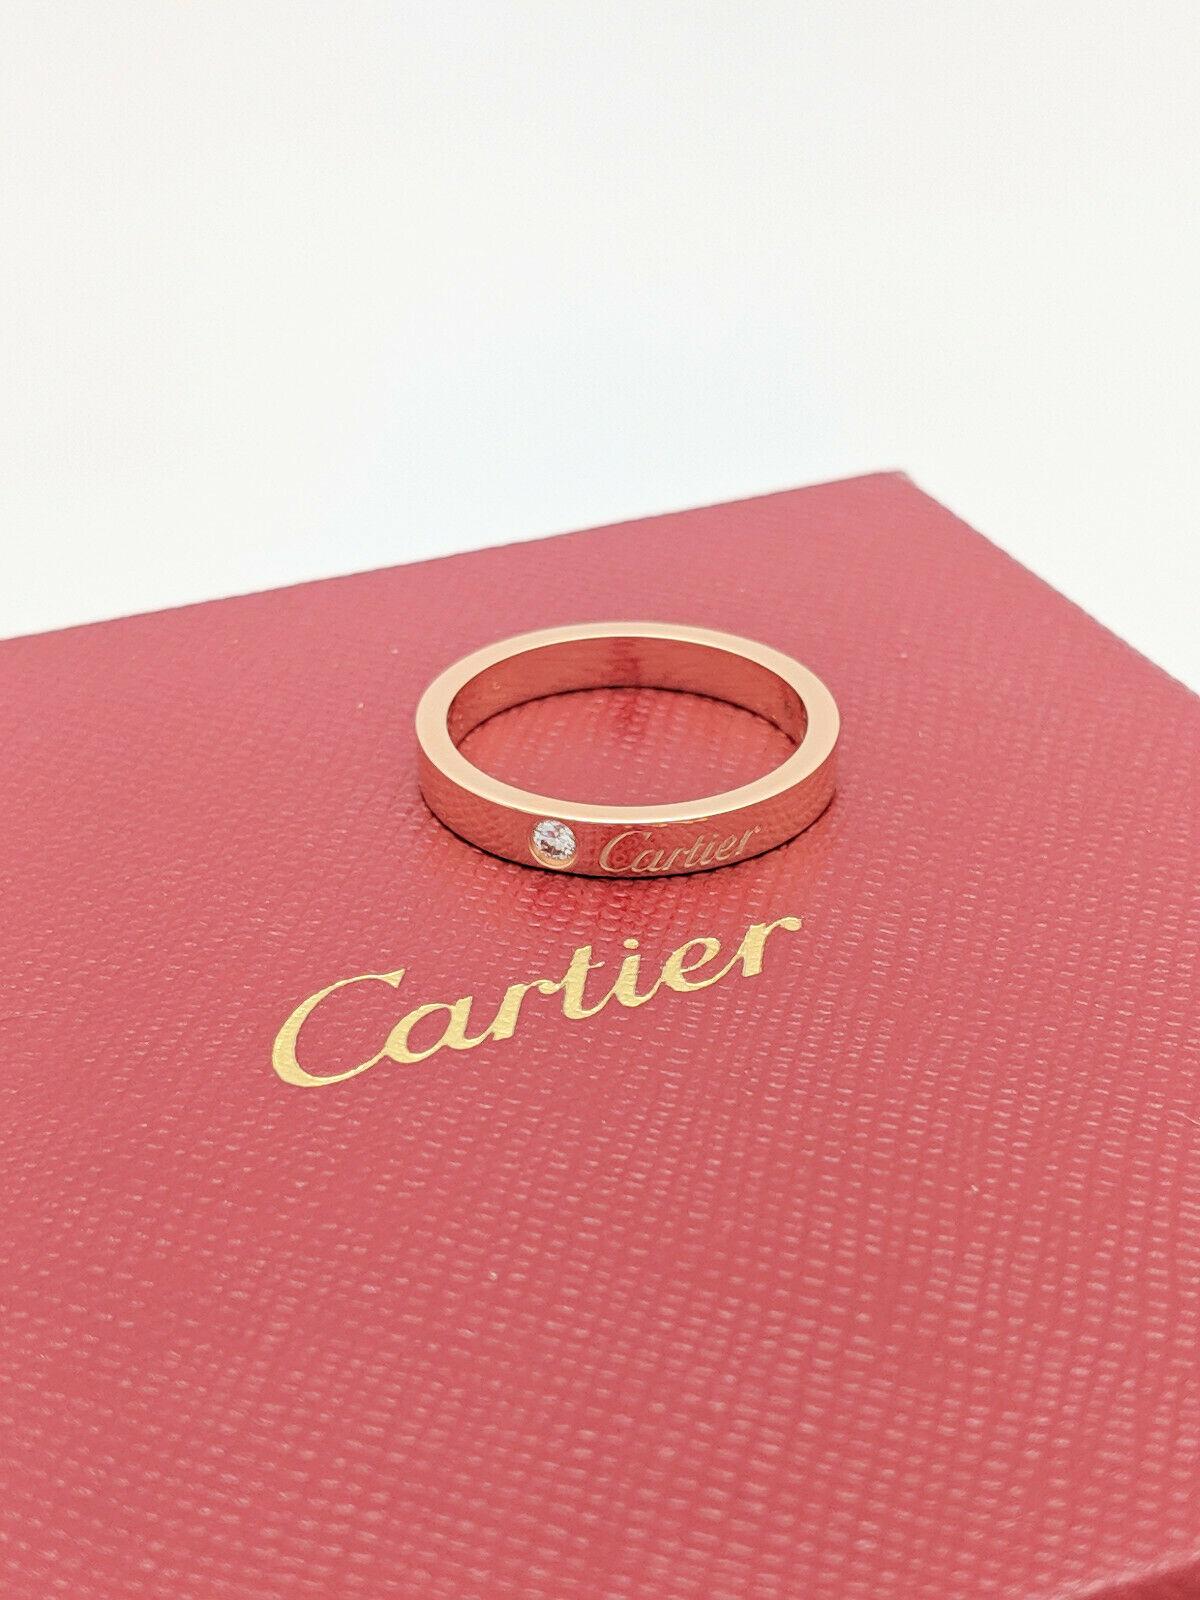 Authentic Cartier C De Cartier Diamond Wedding Band Ring Pink Gold In Good Condition For Sale In Gainesville, FL